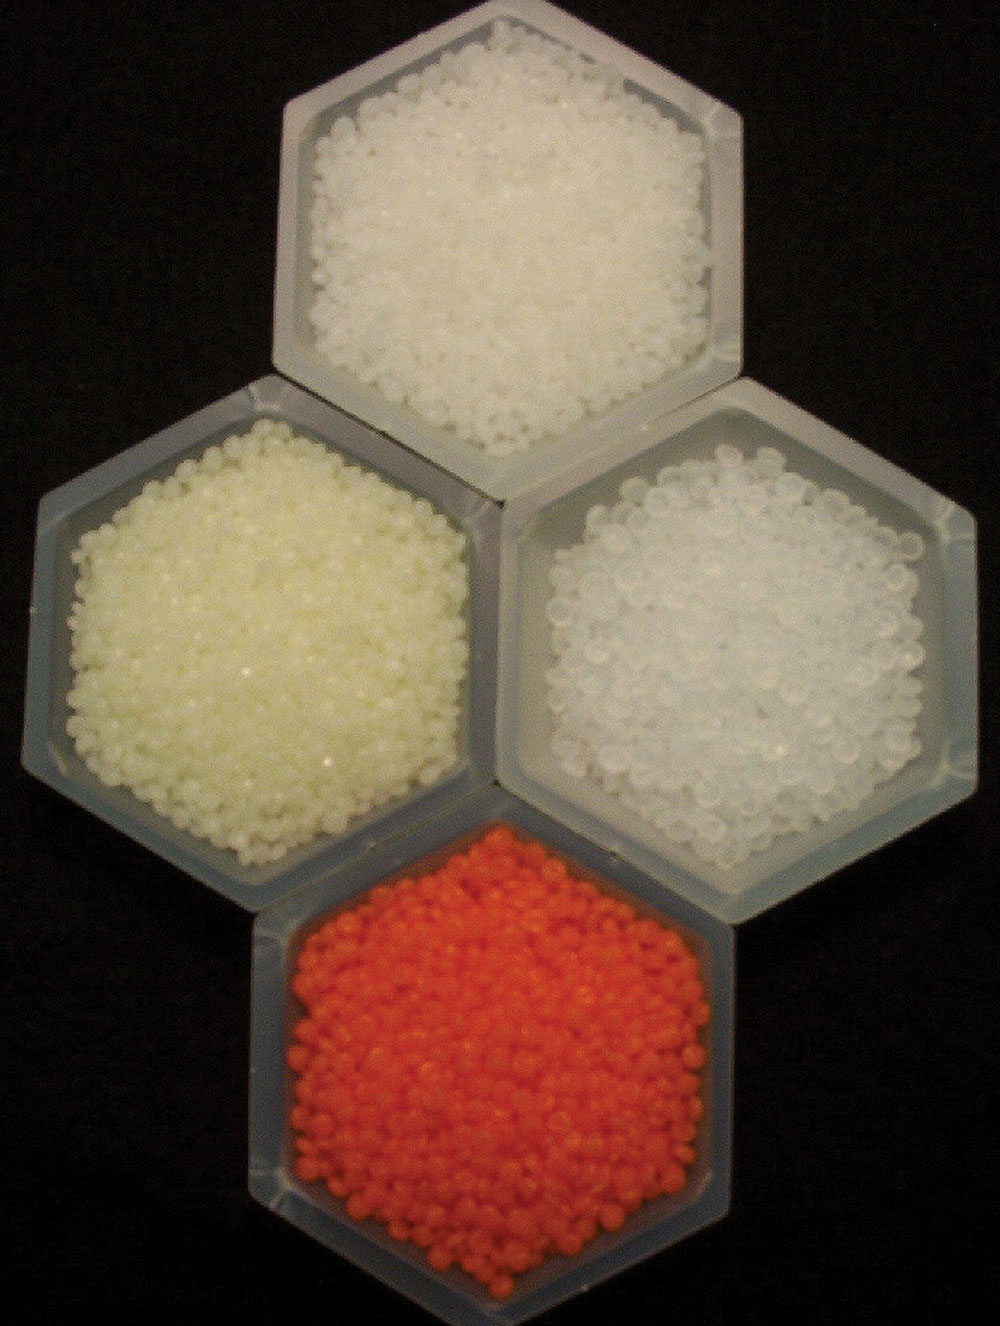 Photo of polymer resin pellets